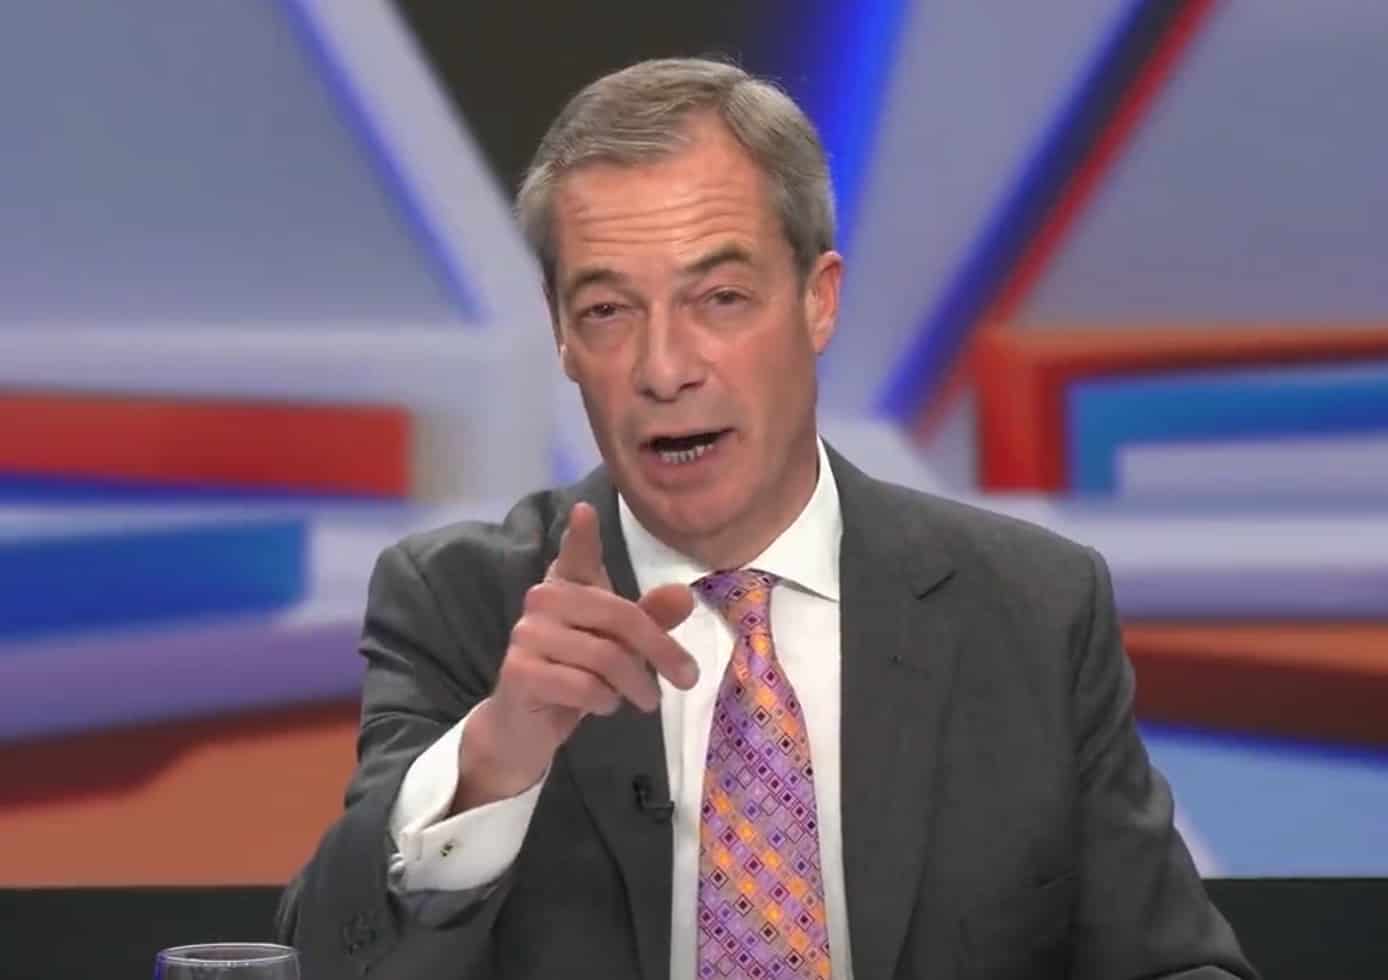 Watch: Reactions as Nigel Farage defends Russia & blames EU for invasion of Ukraine